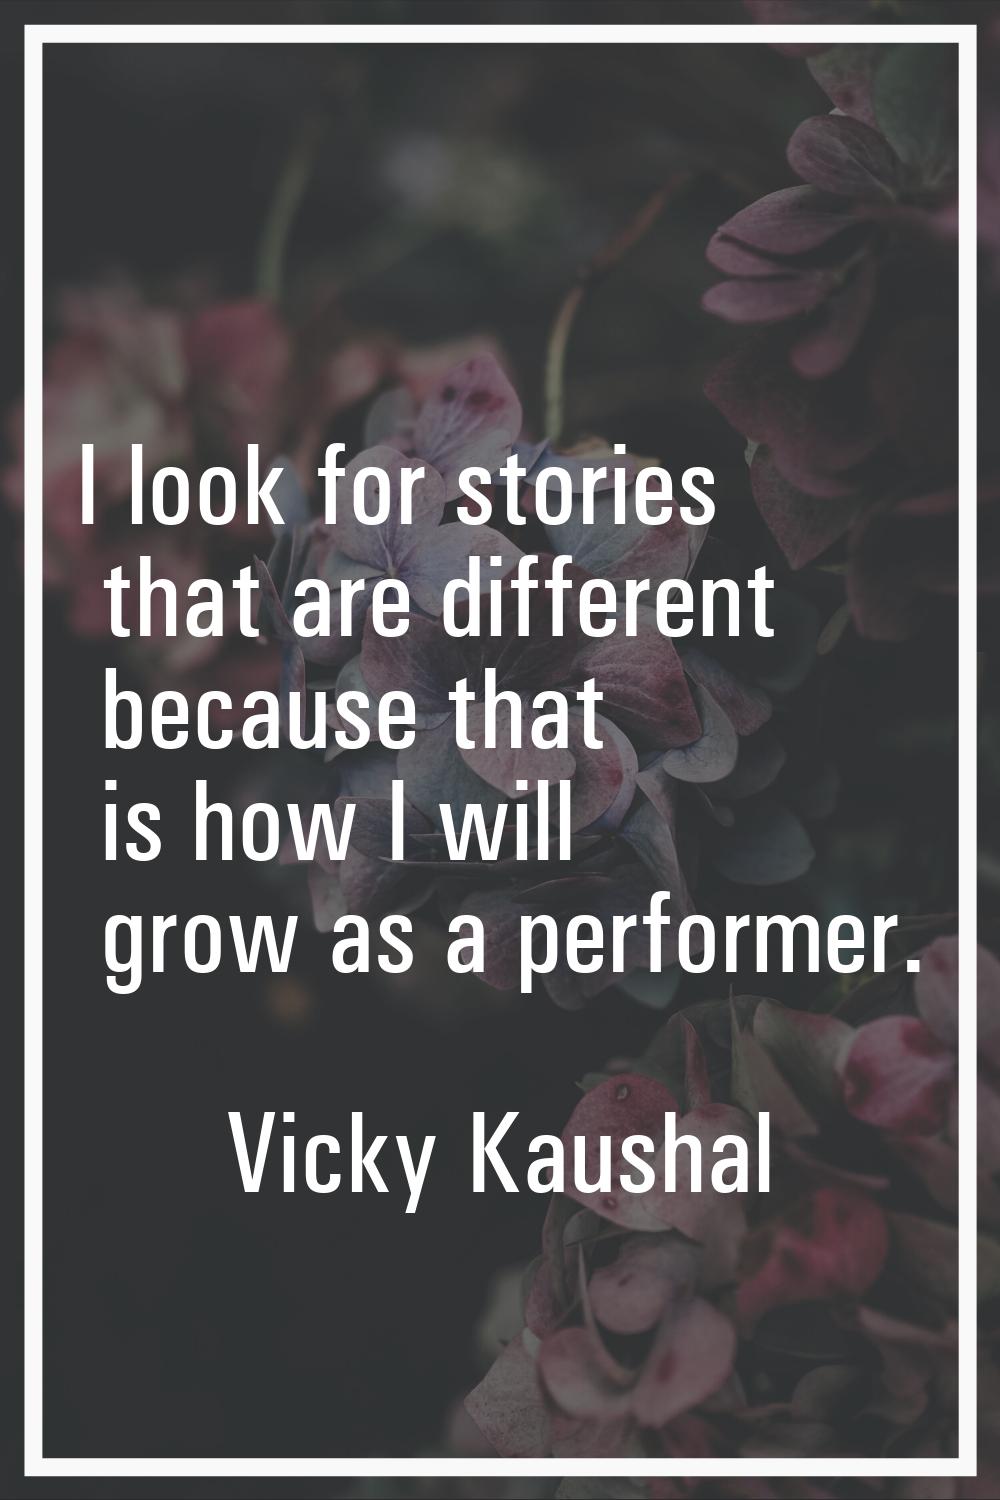 I look for stories that are different because that is how I will grow as a performer.